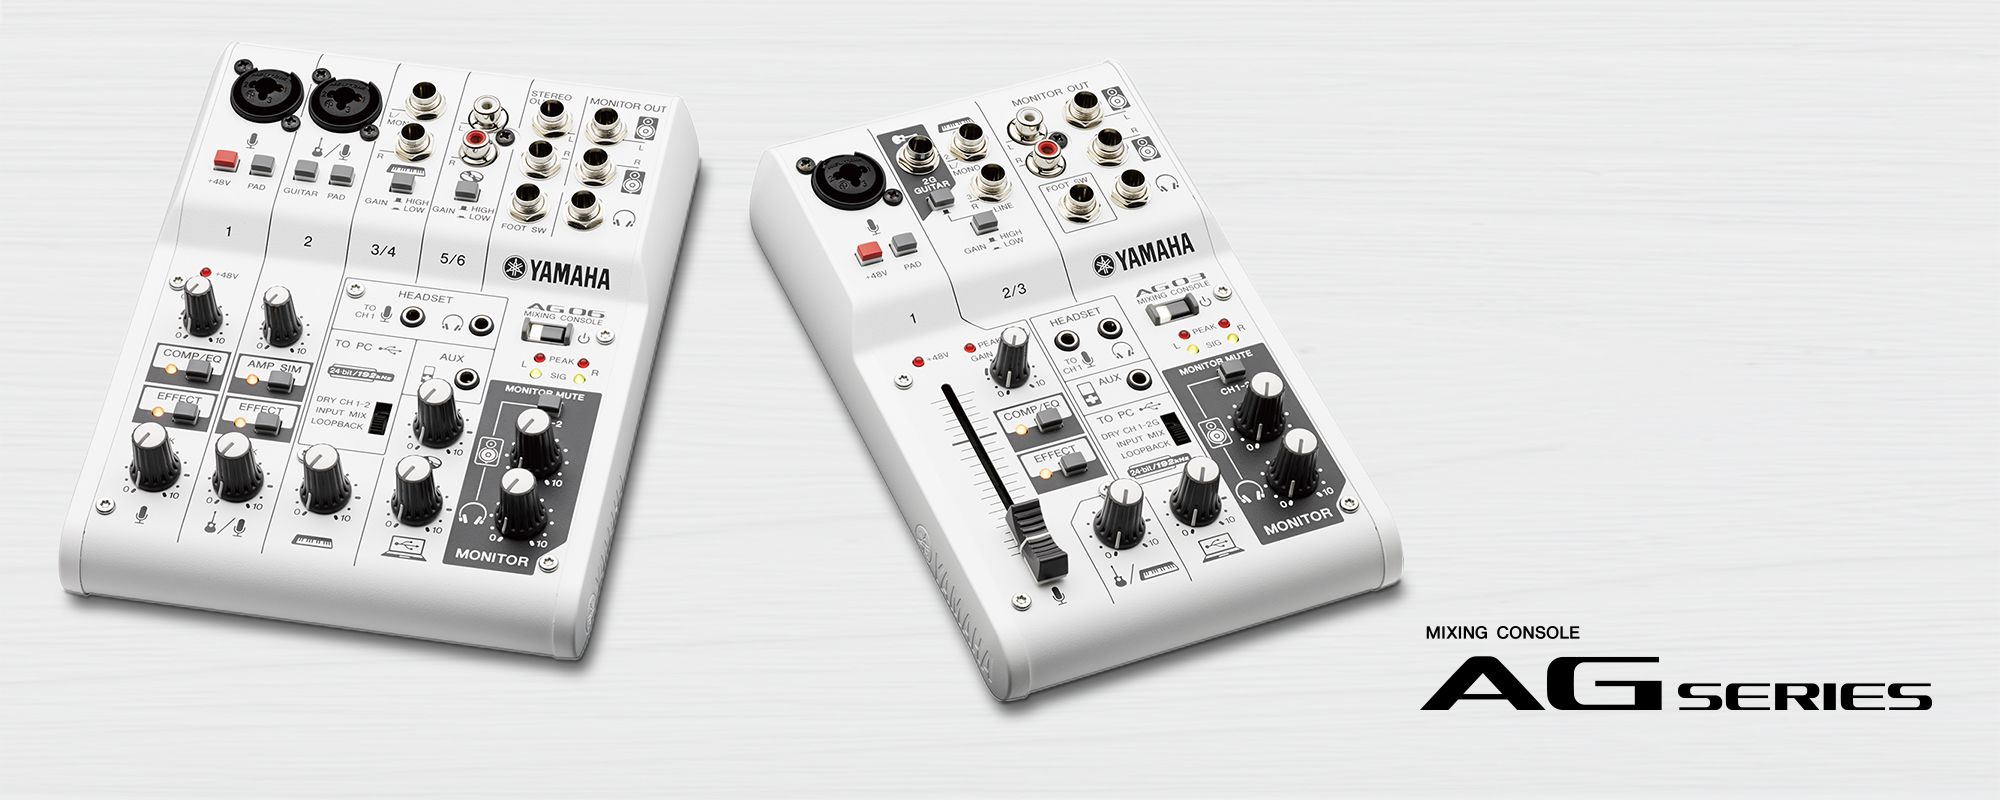 AG06 / AG03 - Overview - Interfaces - Synthesizers  Music Production Tools  - Products - Yamaha - Other European Countries